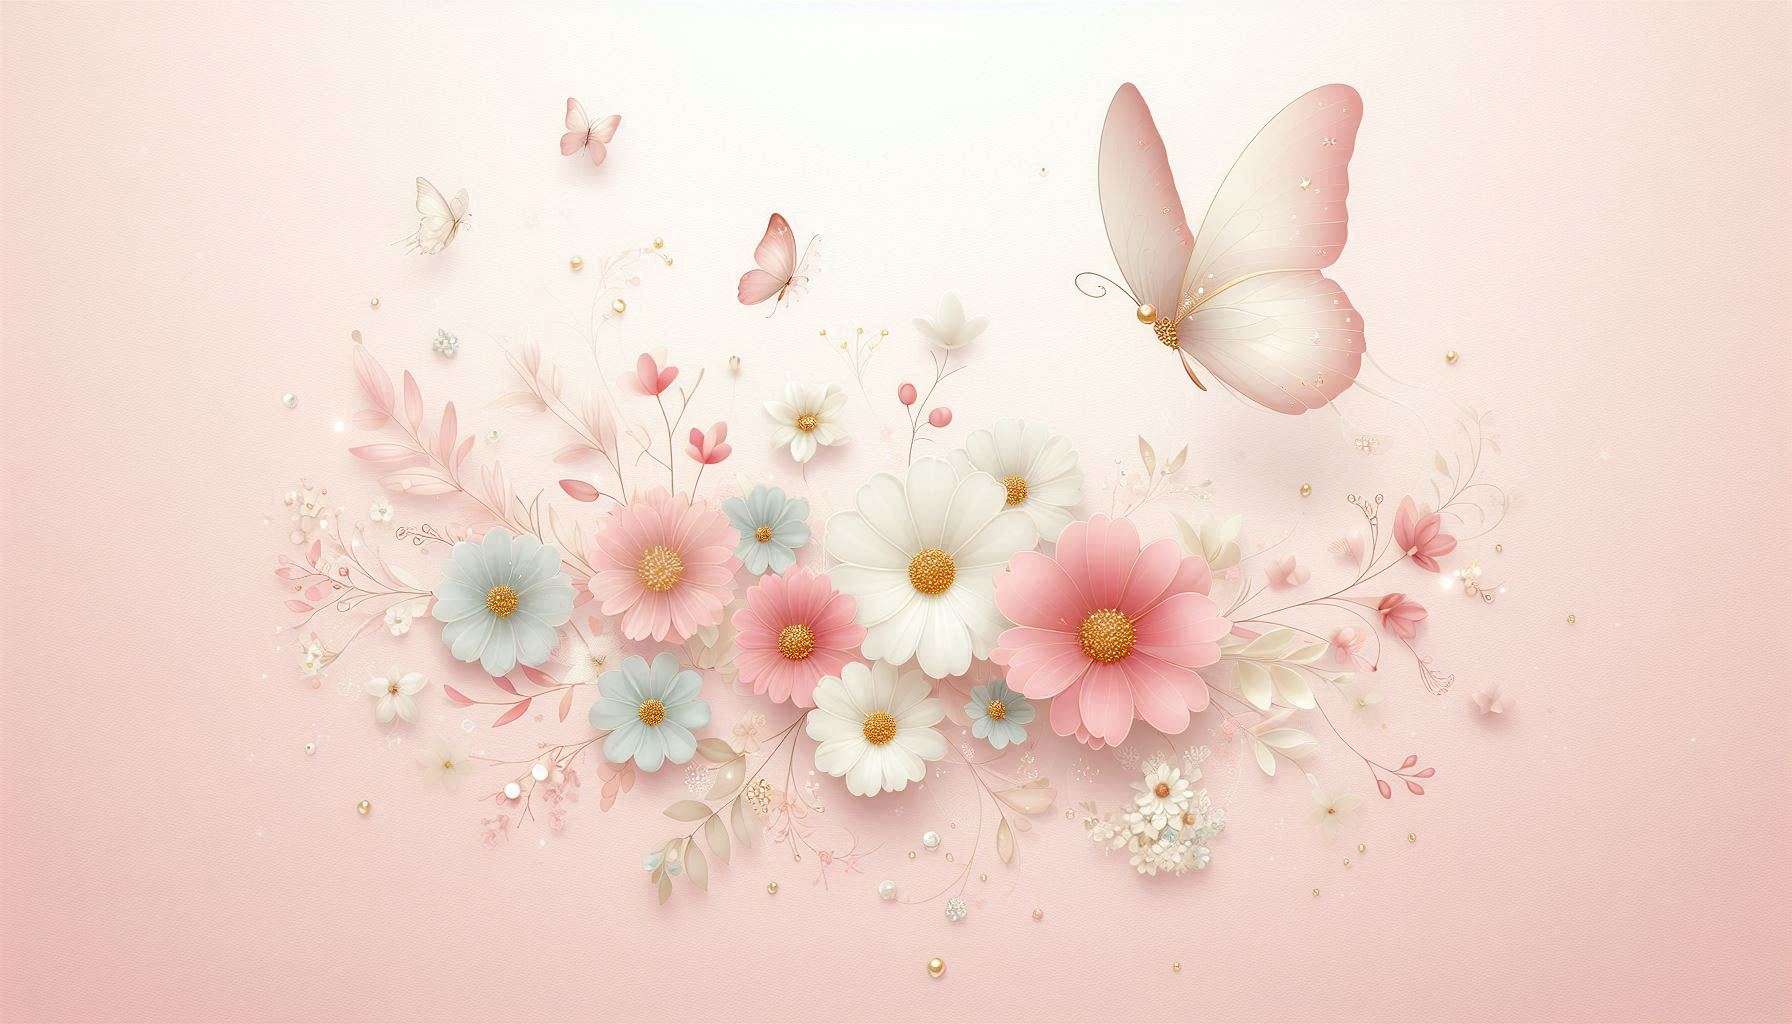 Download Free light pink background with flower wallpaper for websites, slideshows, and designs | royalty-free and unlimited use.